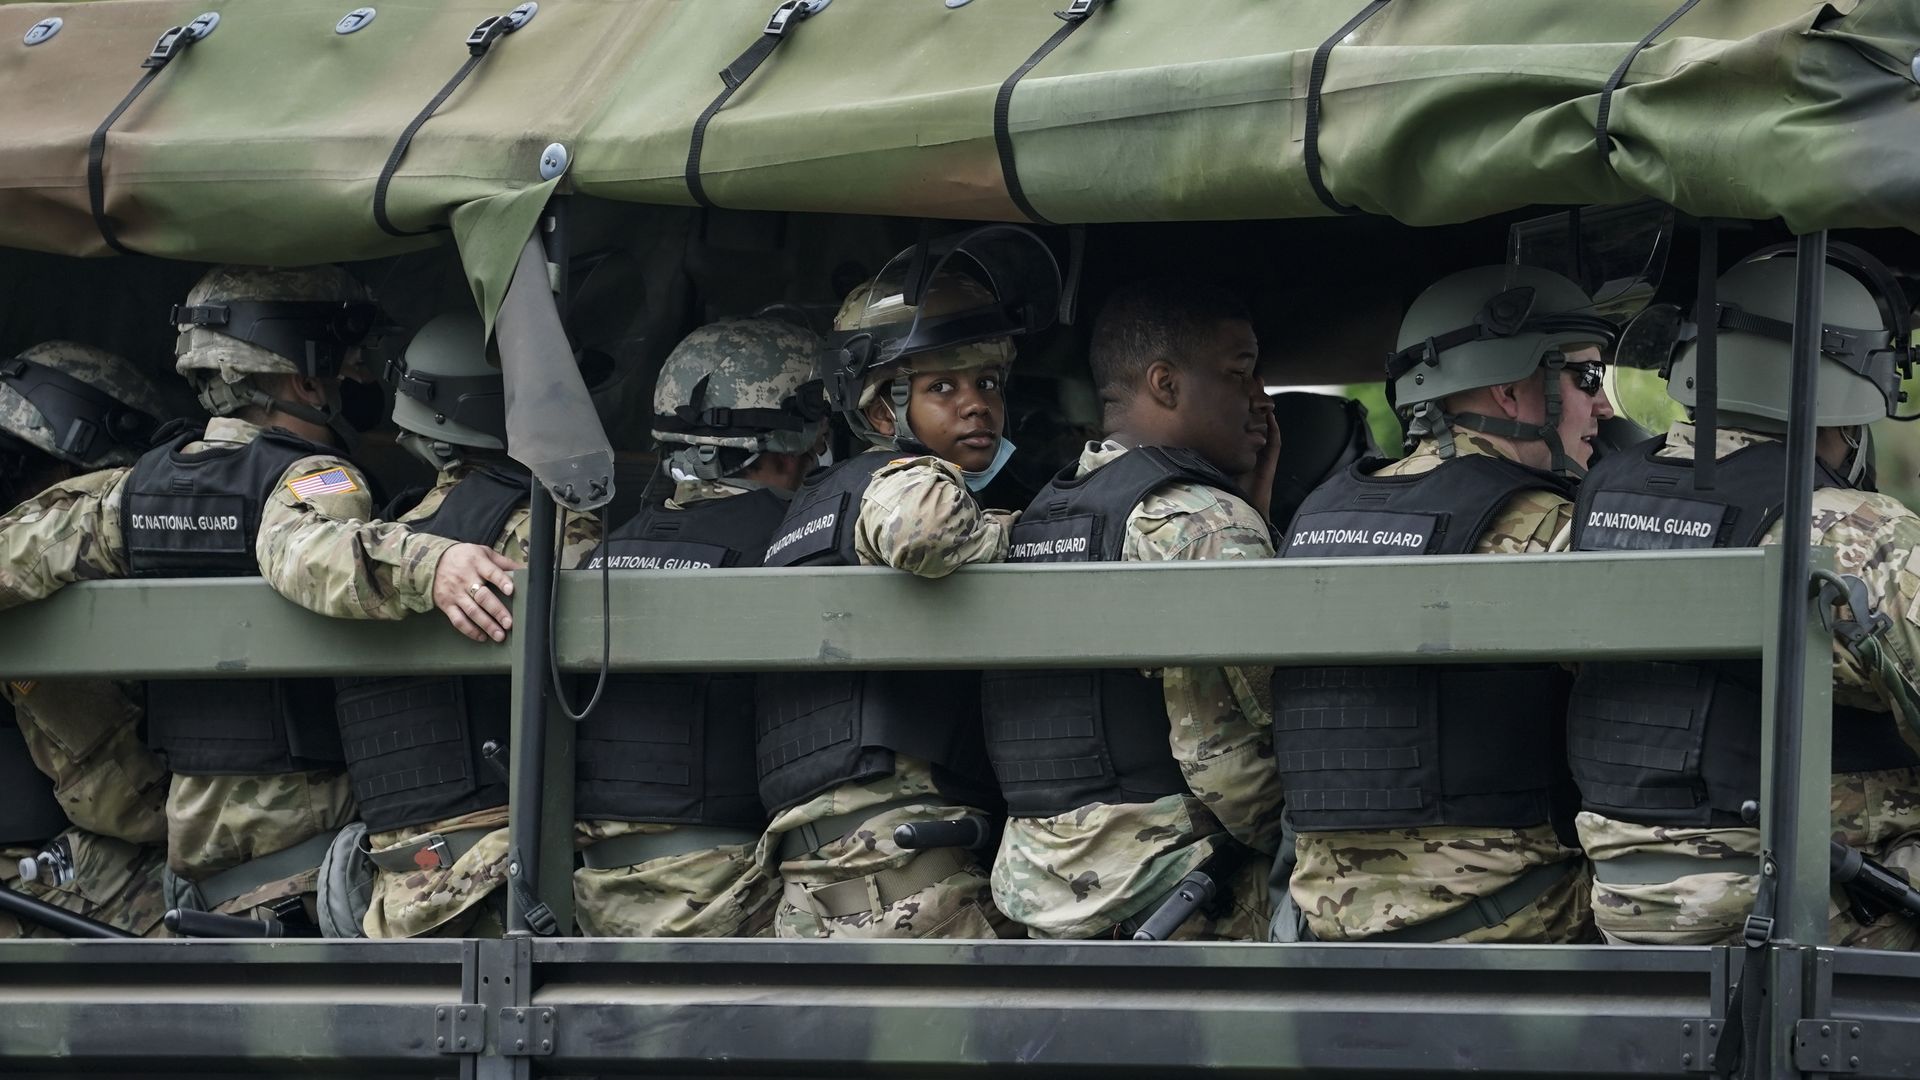 Troops wait aboard personnel carriers to take them toward the city from the Joint Force Headquarters of the D.C. National Guard on June 2, 2020 in Washington, DC.